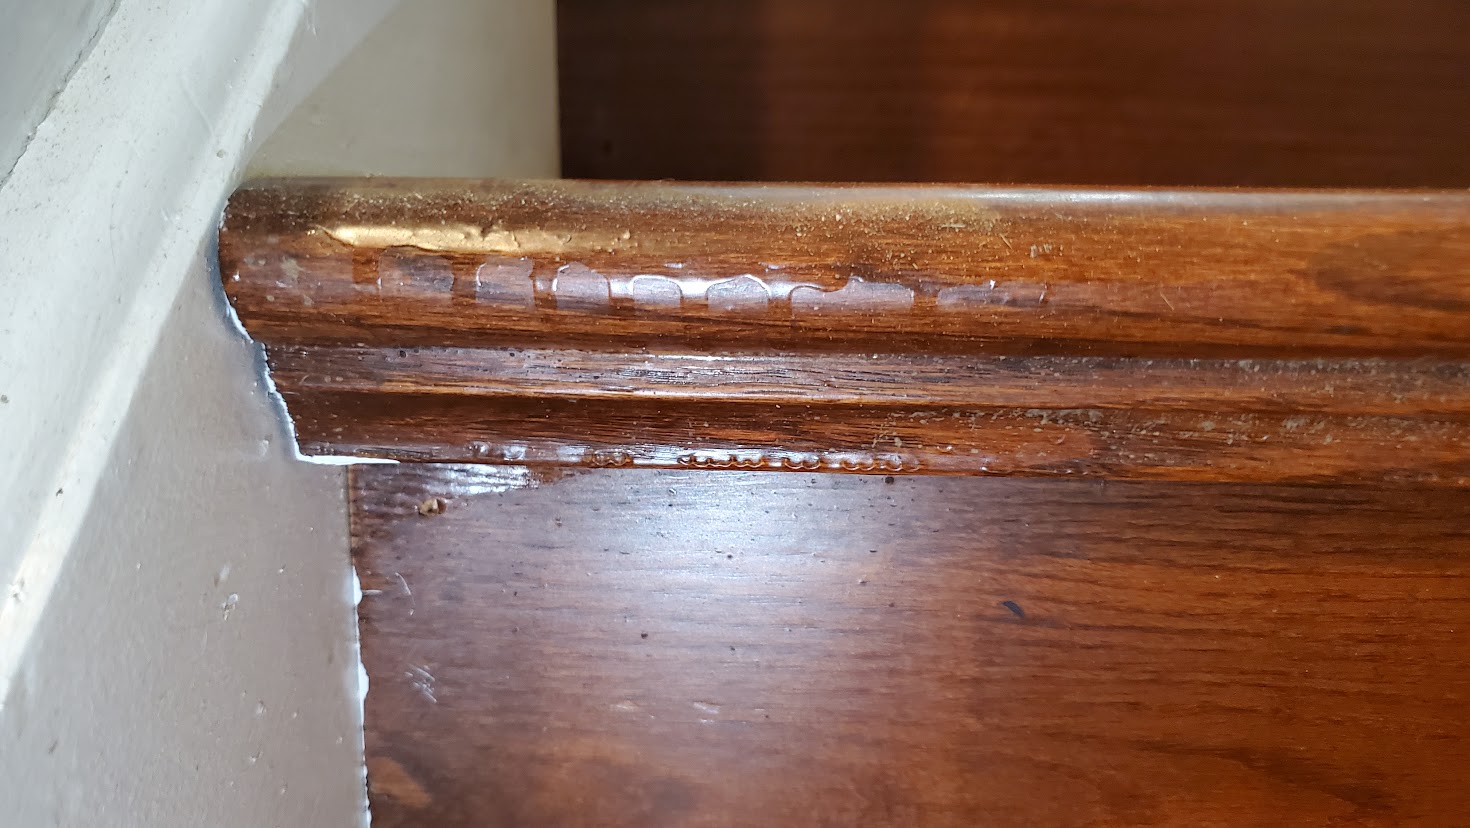 polyurethane drips and sanding matter in finish on red oak stairs